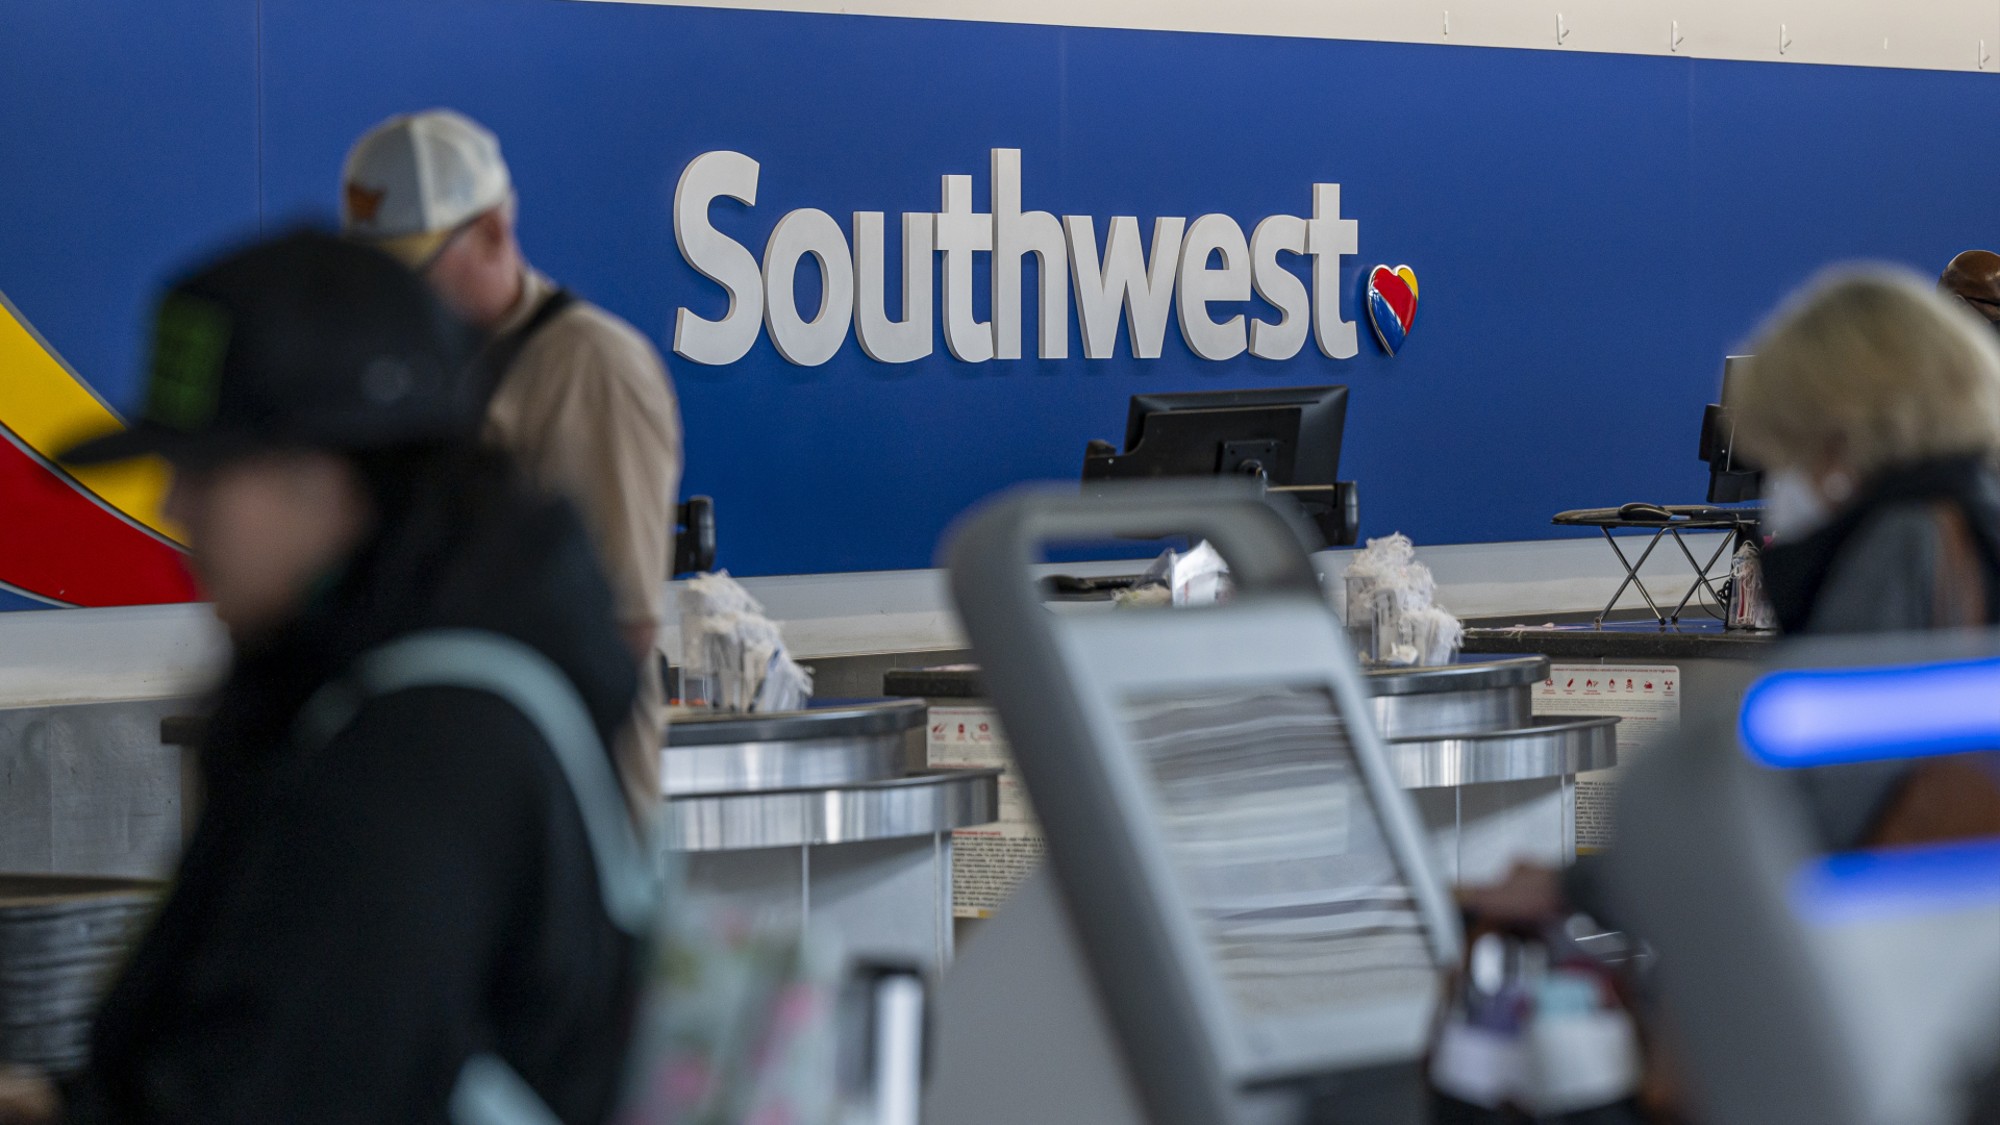  'Assign seats, Southwest, and make your extra buck. But remember your customers.' 